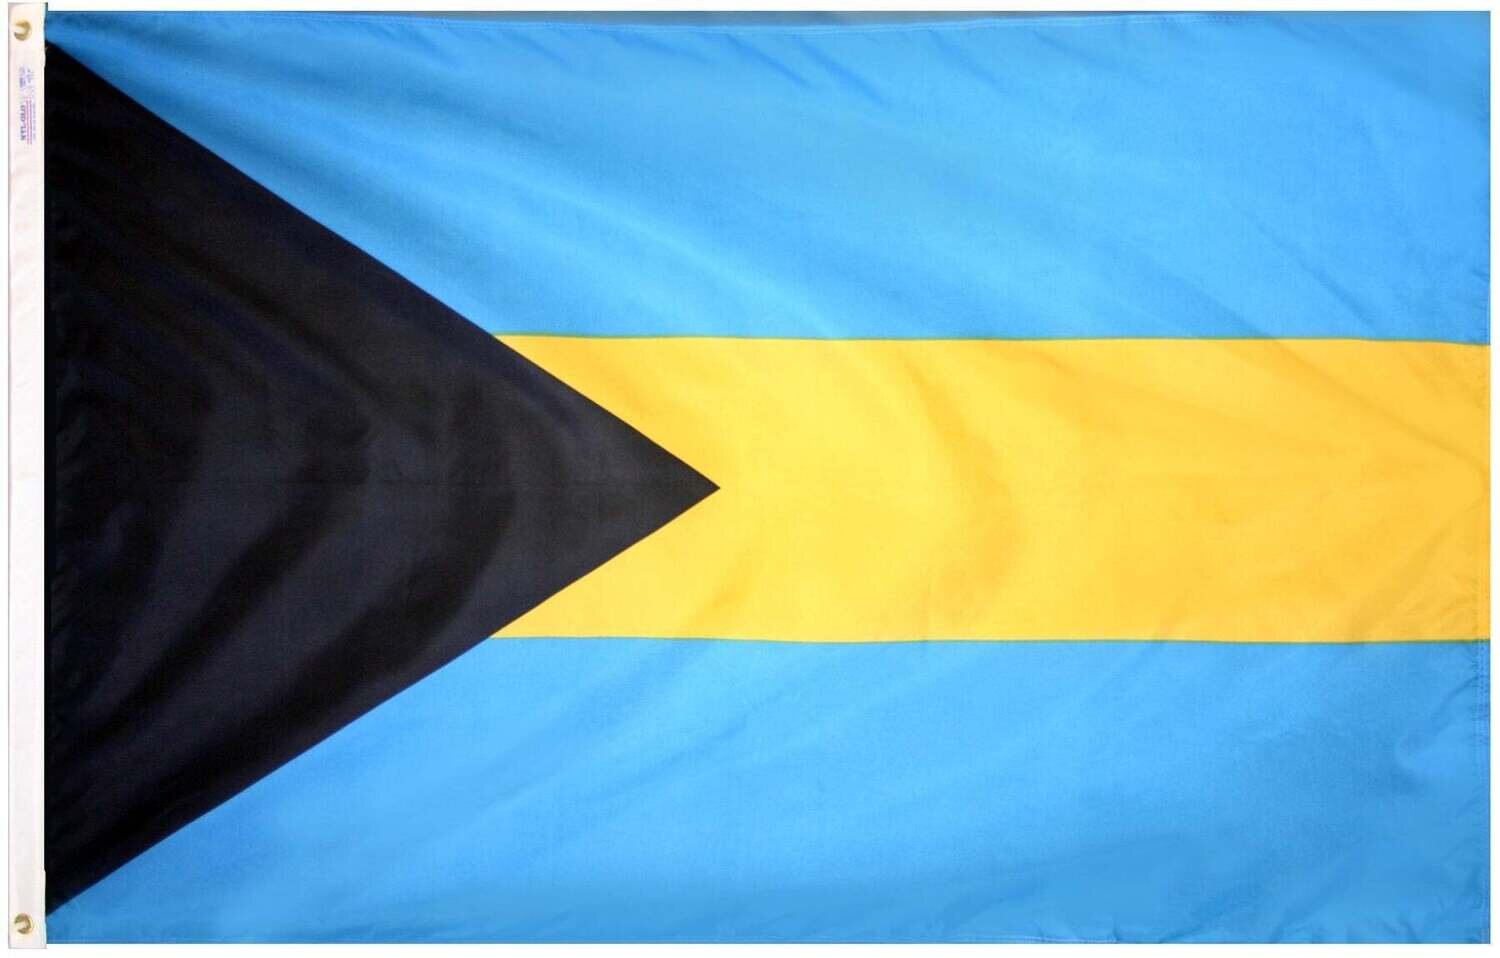 Bahamas Flag 2x3 ft. Nylon SolarGuard Nyl-Glo 100% Made in USA to Official United Nations Design Specifications.